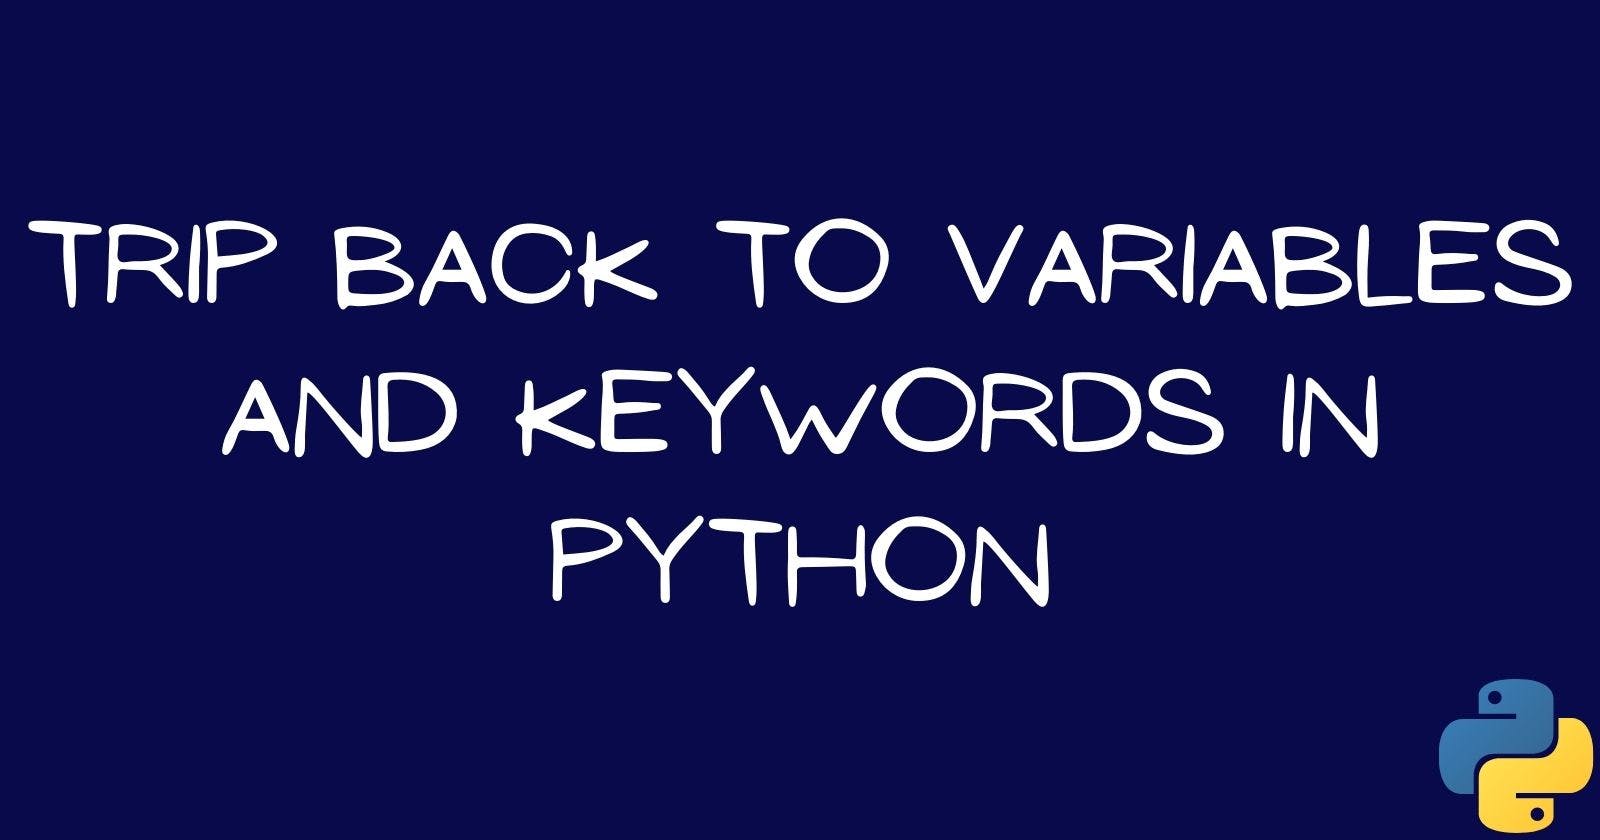 Trip Back to Variables and Keywords in Python